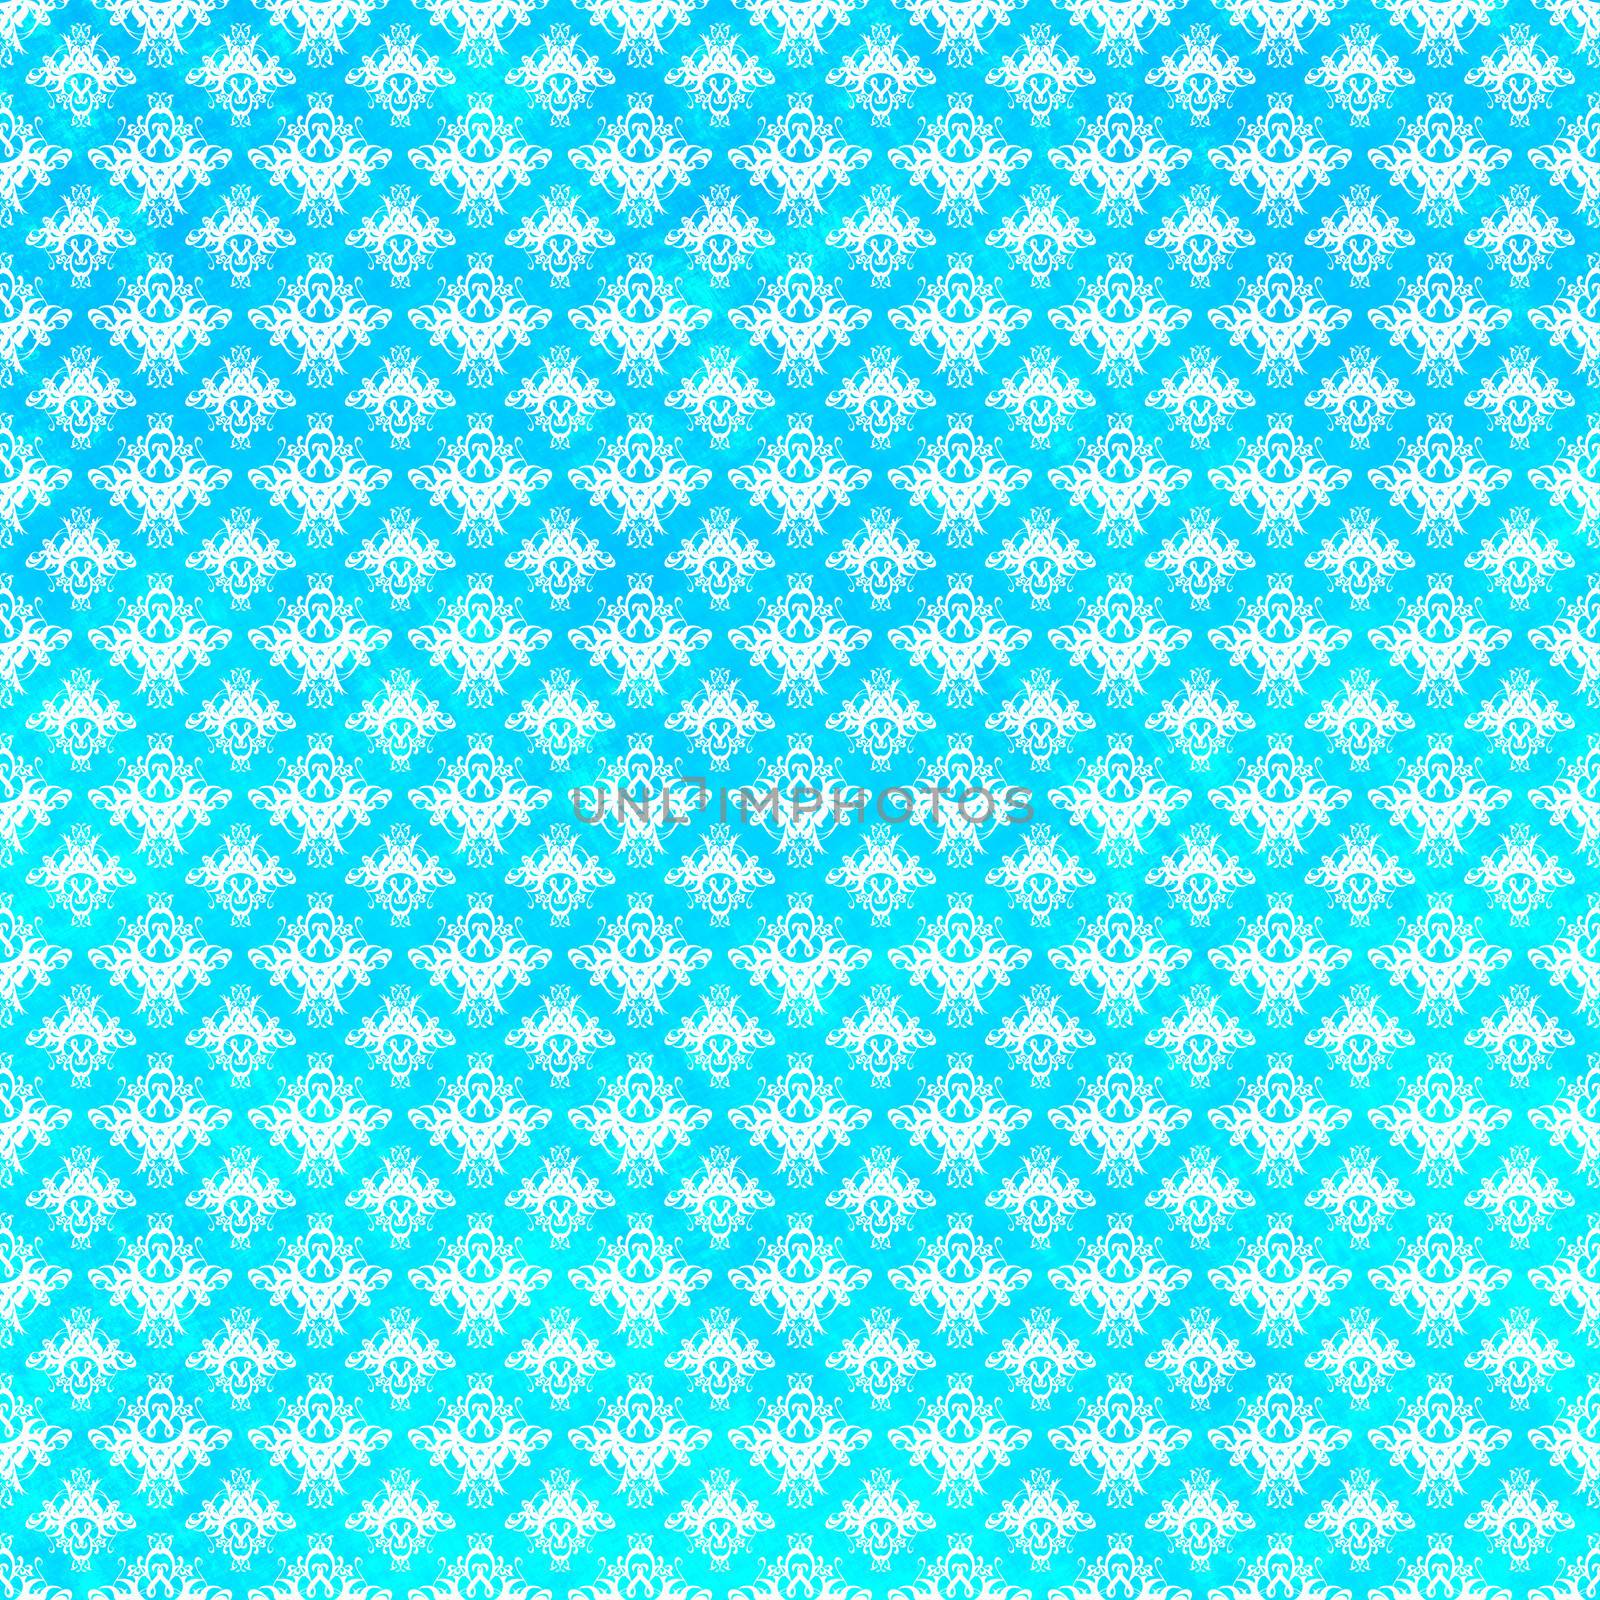 Blue damask pattern with grunge textures.